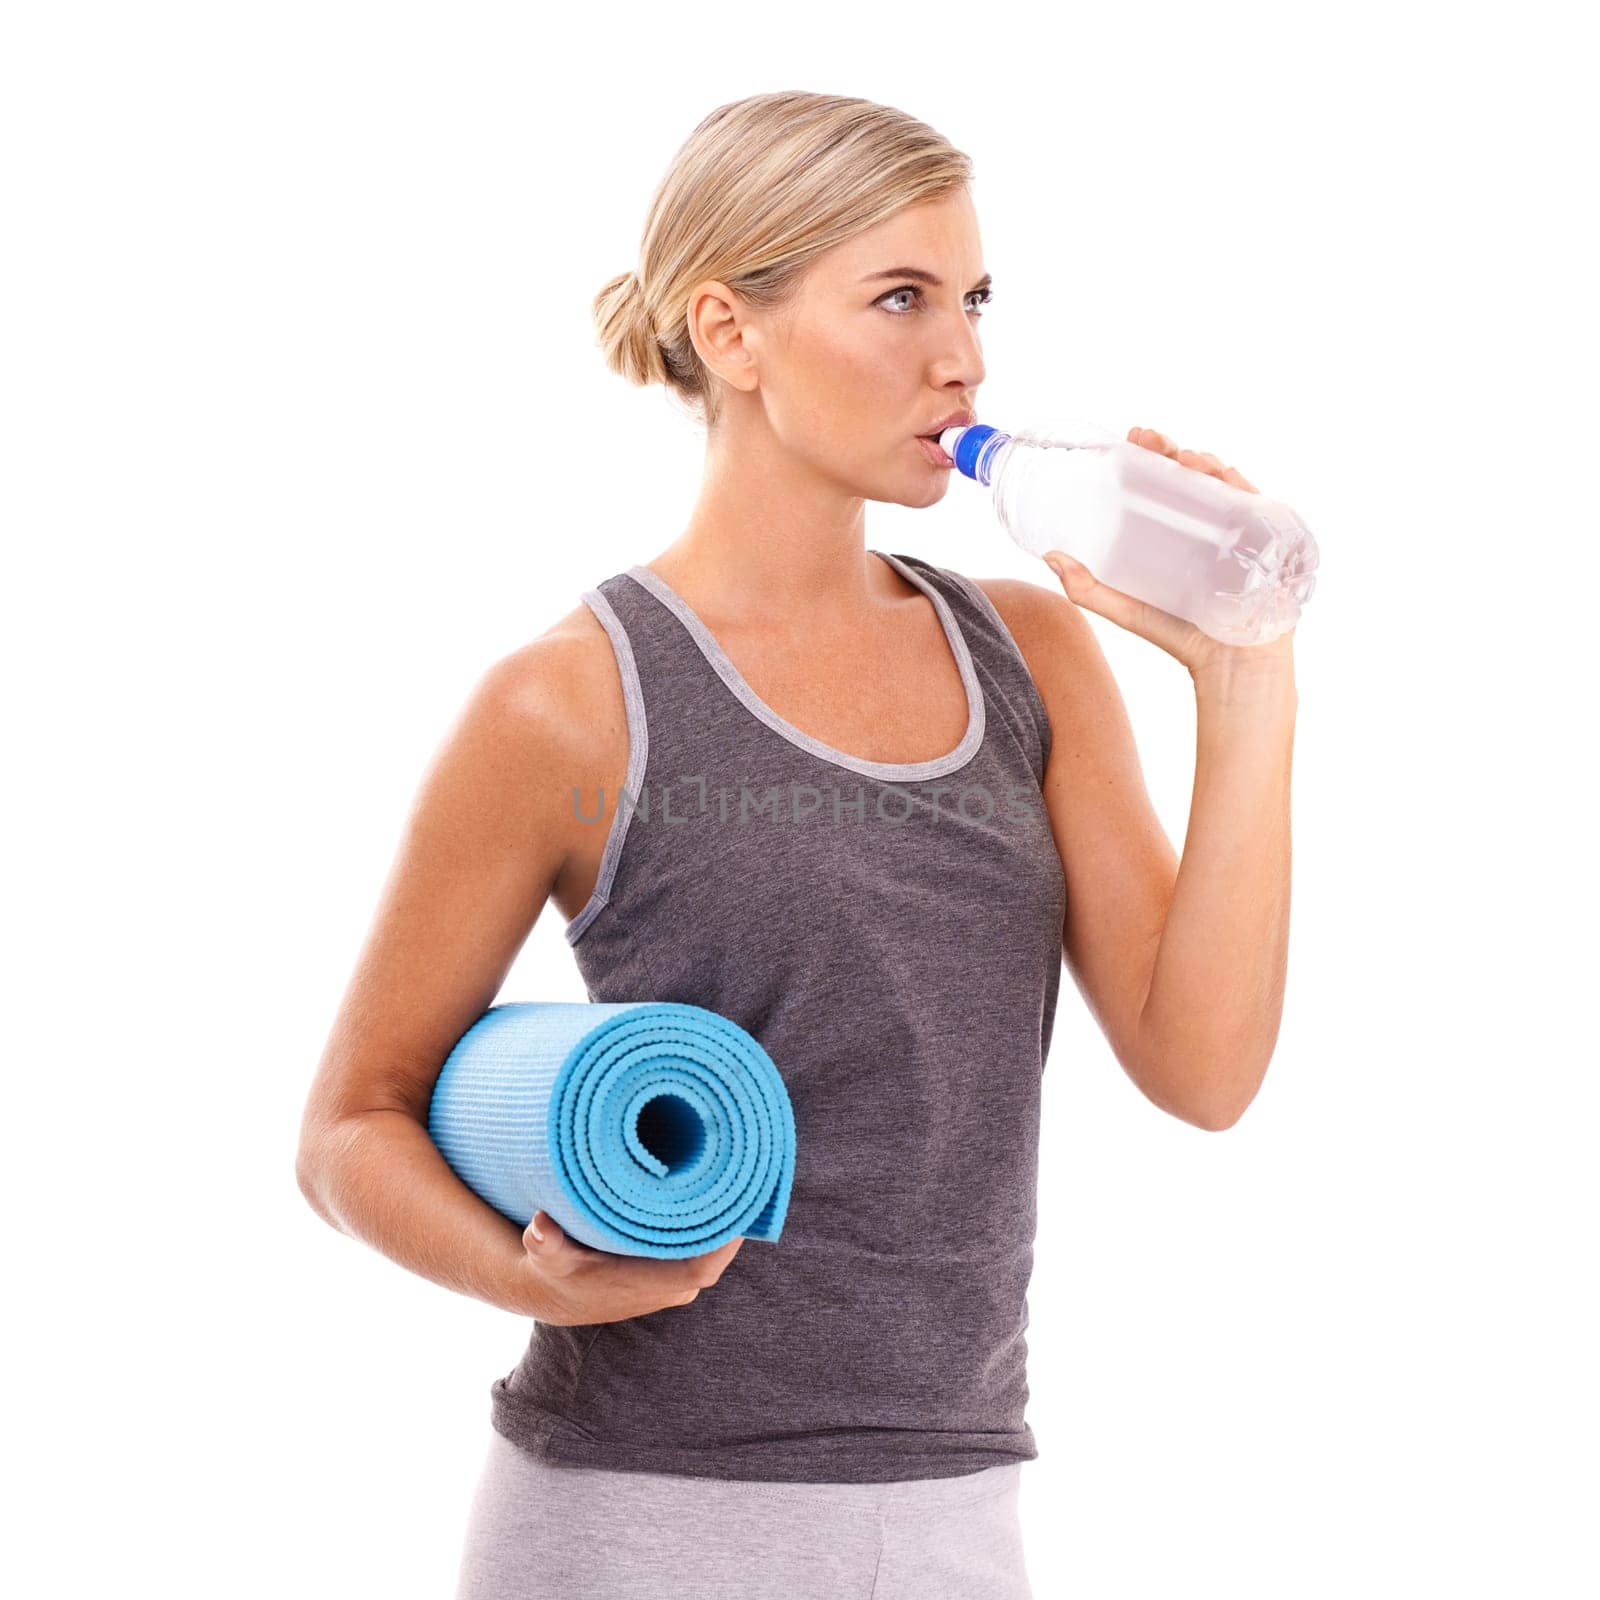 Yoga, exercise mat and woman drinking water for body care hydration, fitness lifestyle or pilates studio workout. Healthcare wellness, training and health girl with liquid bottle on white background.